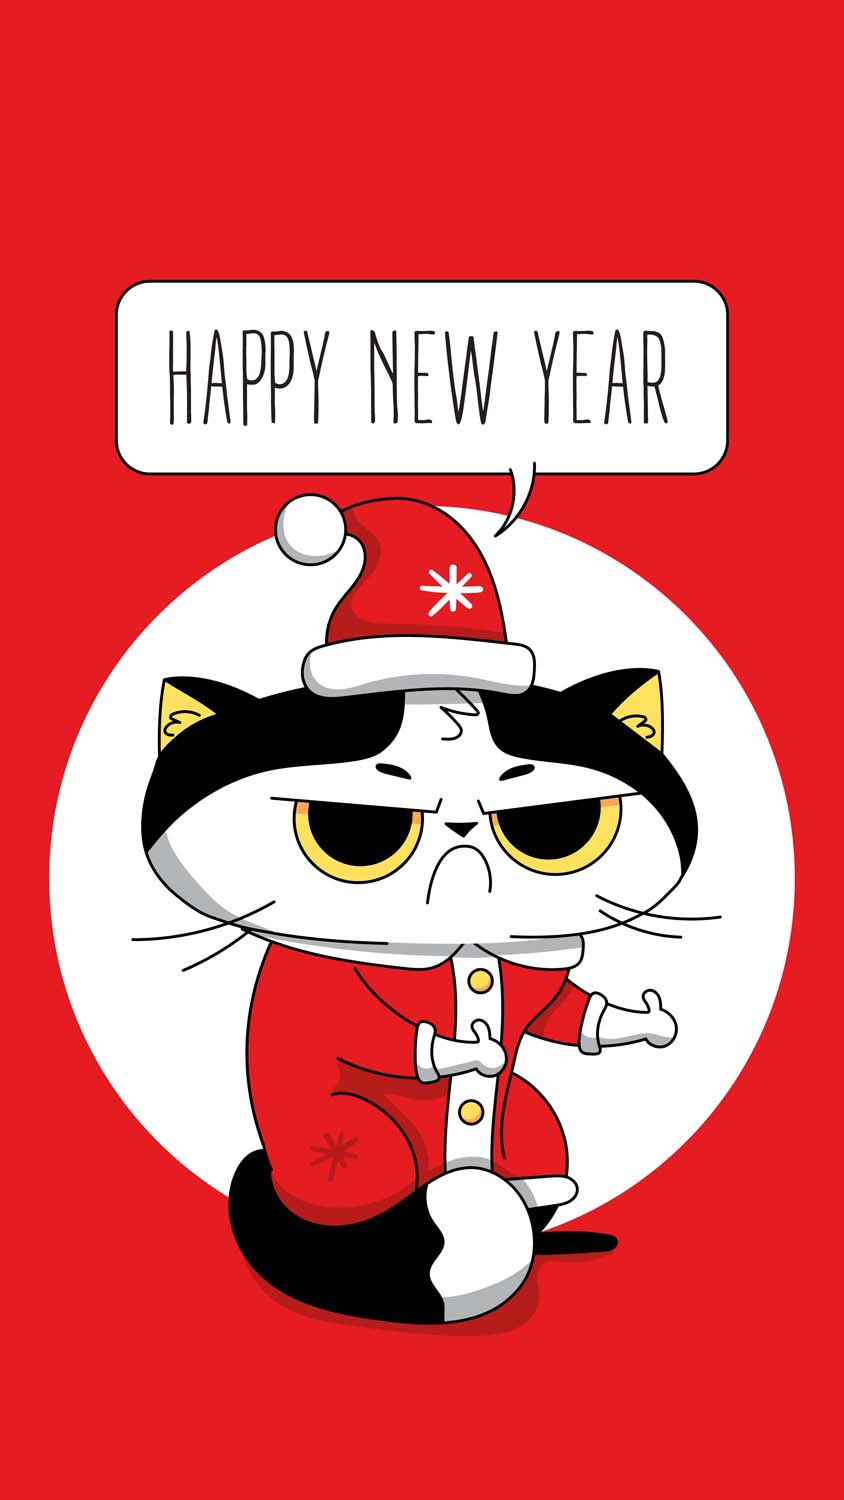 Happy New Year IPhone Wallpaper HD  IPhone Wallpapers